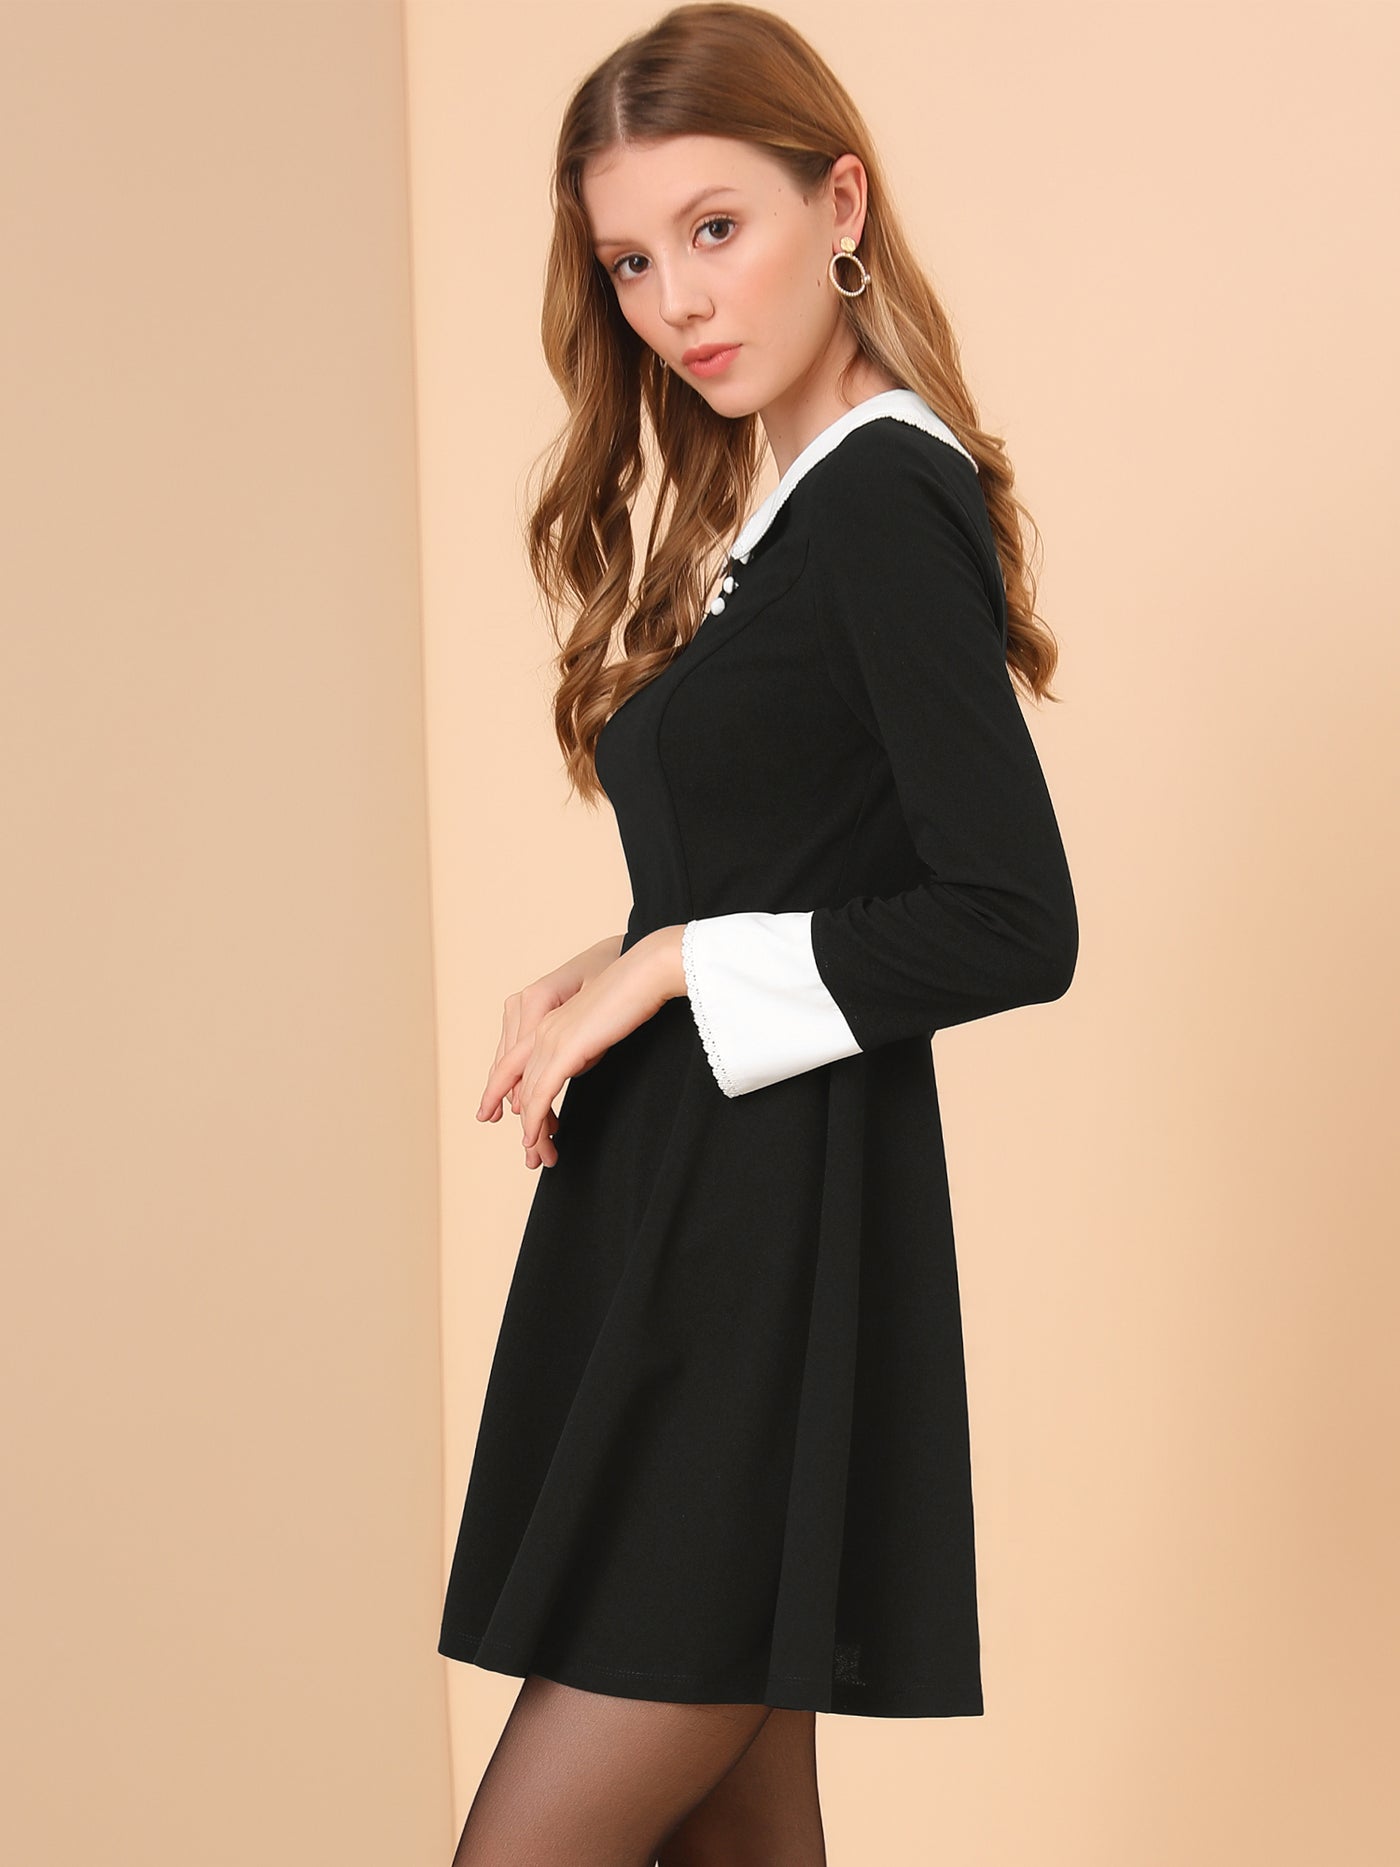 Allegra K Long Sleeve Peter Pan Collar Christmas Cute Fit and Flare Dress